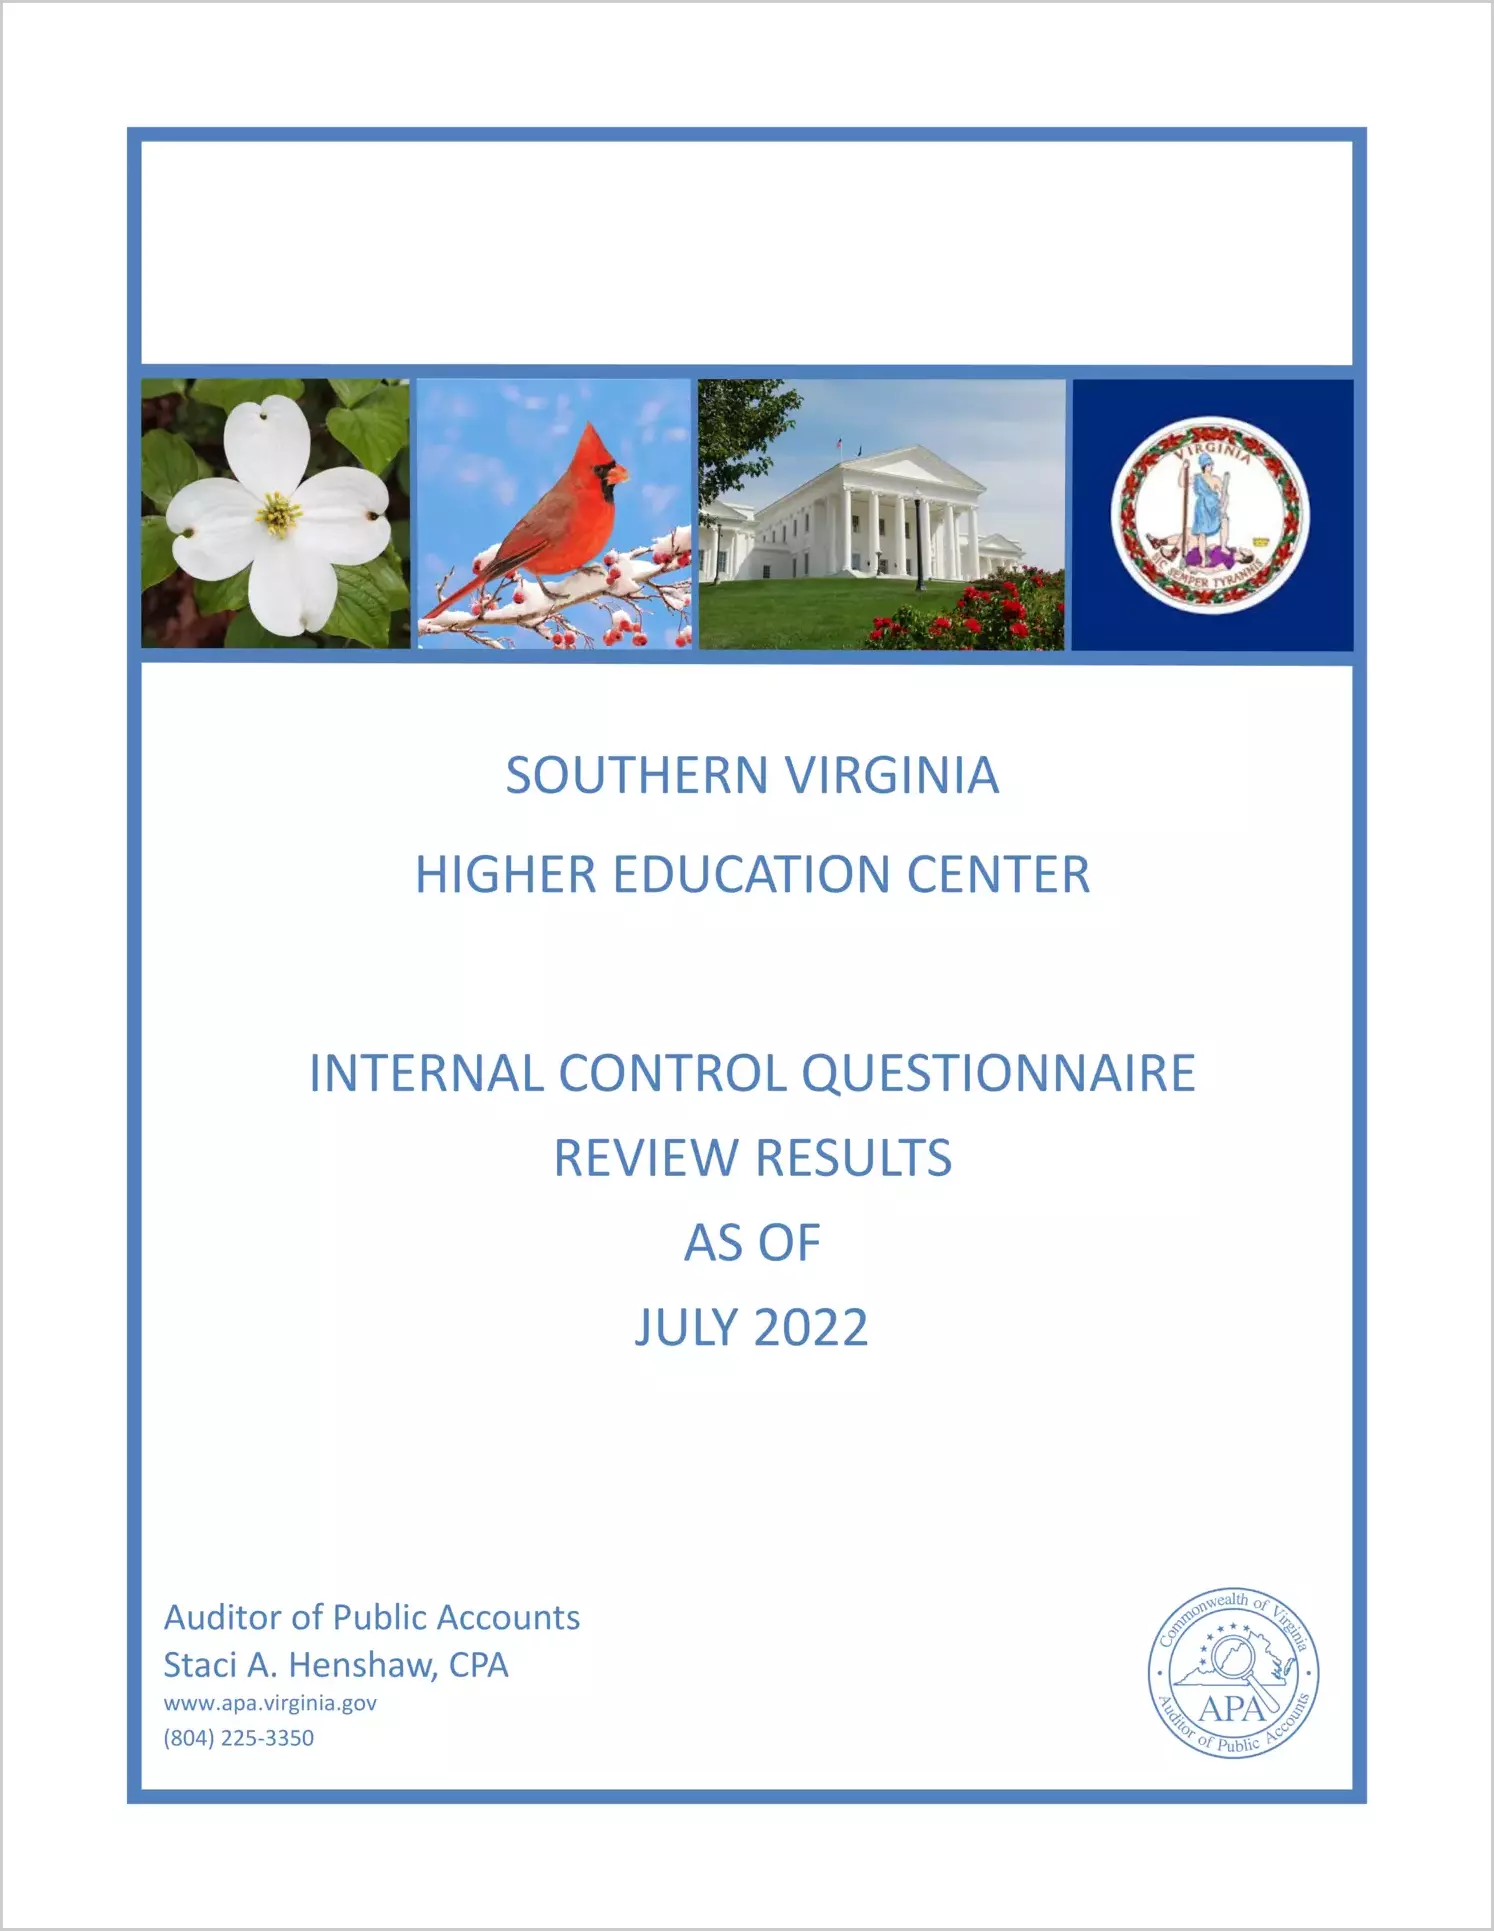 Southern Virginia Higher Education Center Internal Control Questionnaire Review Results as of July 2022